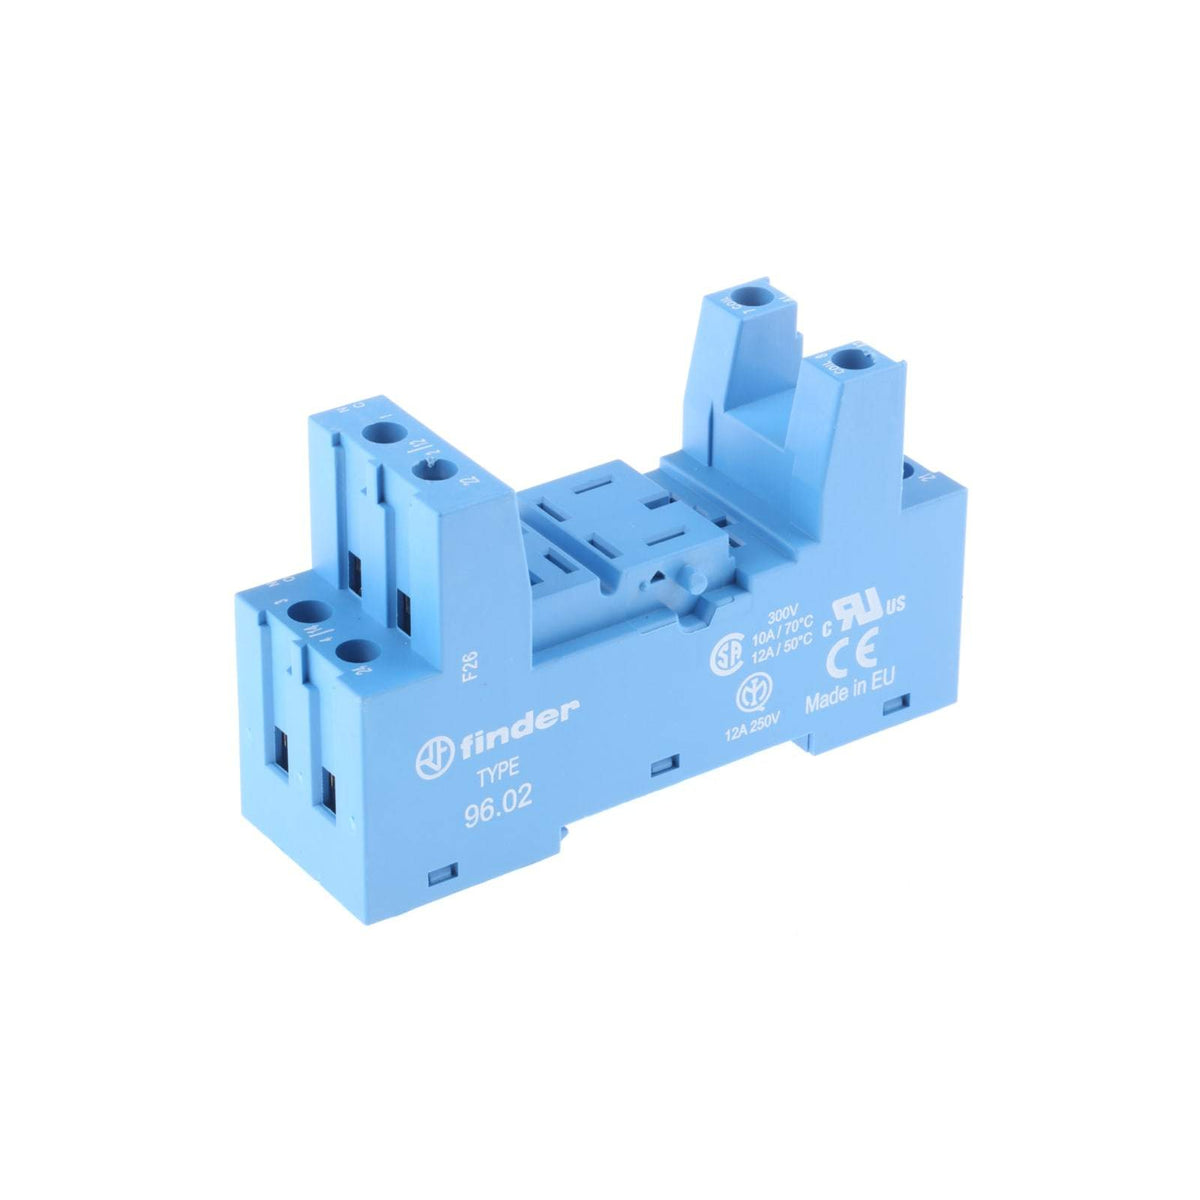 Finder 96 Relay Socket for use with 56.32, 250V ac